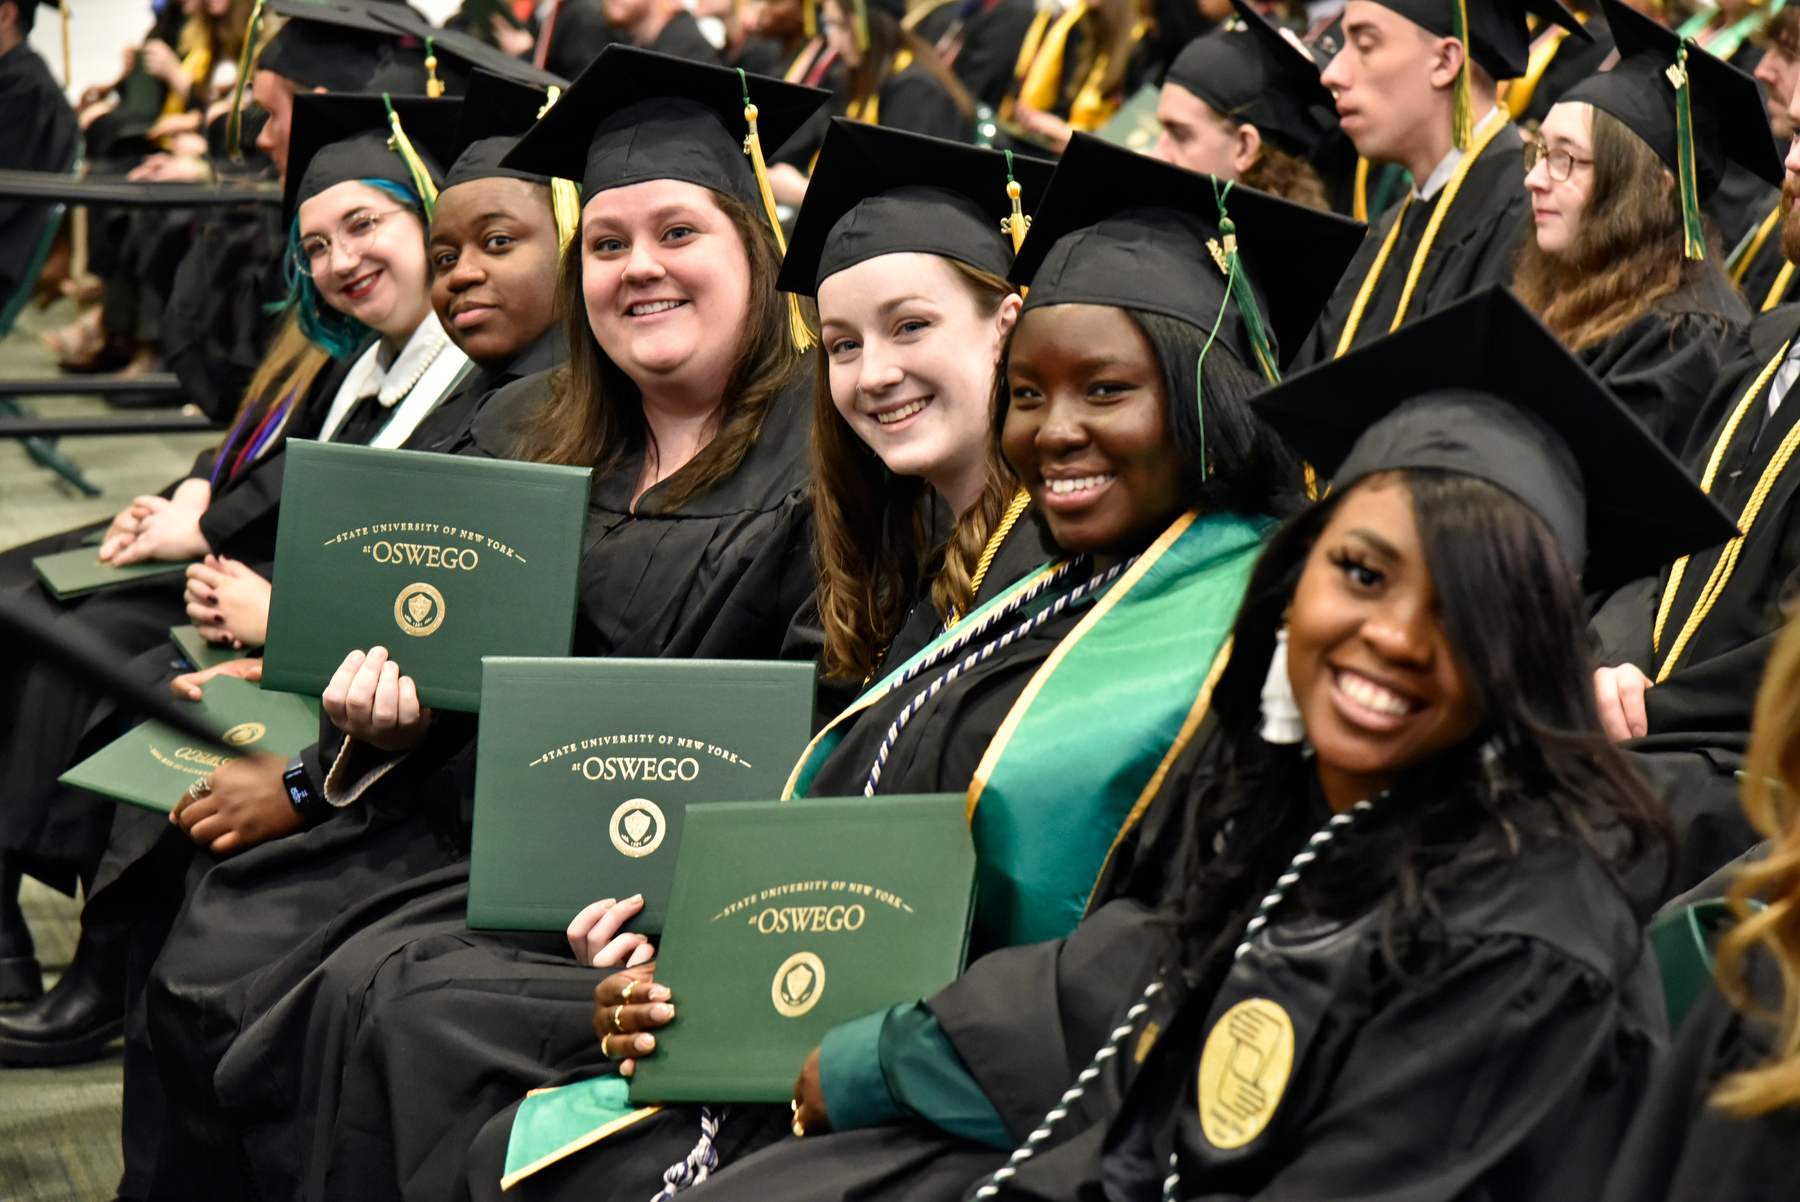 Showing their pride are graduates from the College of Liberal Arts and Sciences, from left, Gabrielle Sennert, Caleb Whyte, Alyson McDonough, Kimberly Reilly, Brittany Ferguson and Lidsai Jammy Jean Baptiste.